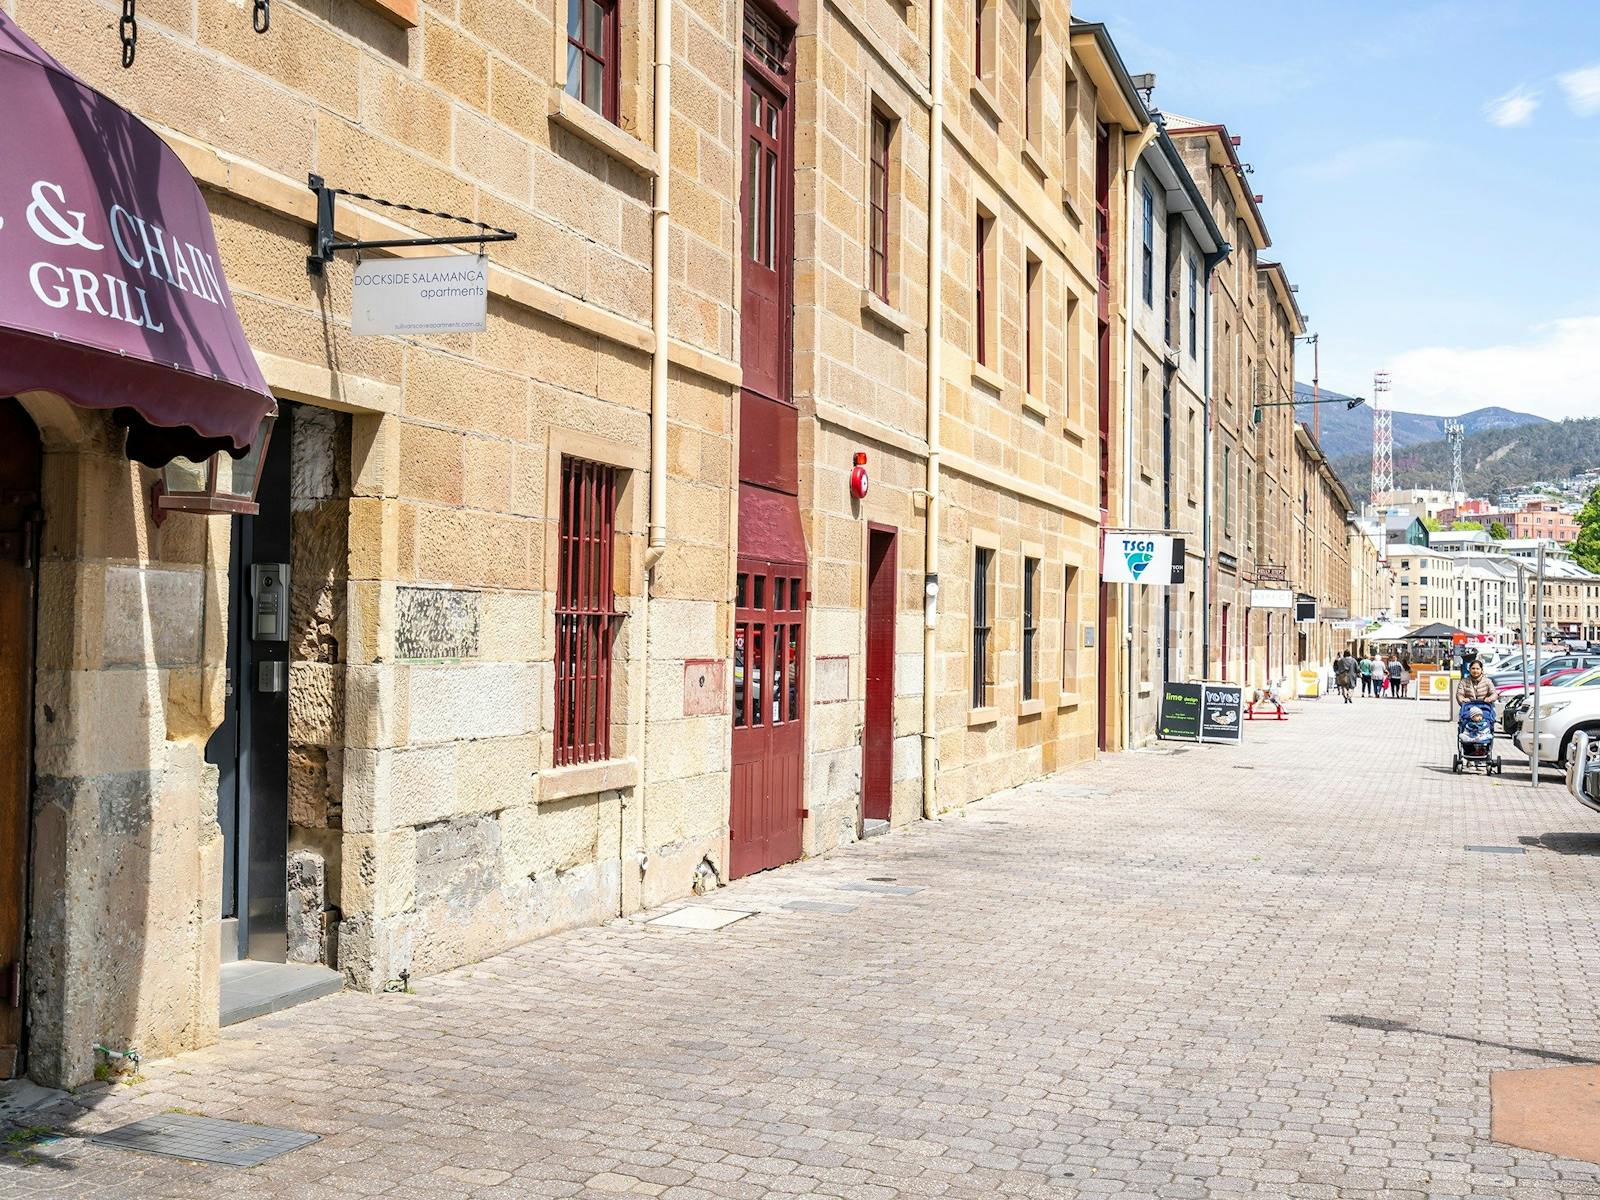 Walk out onto Salamanca Place strip to markets, restaurants, galleries, bars and shopping.